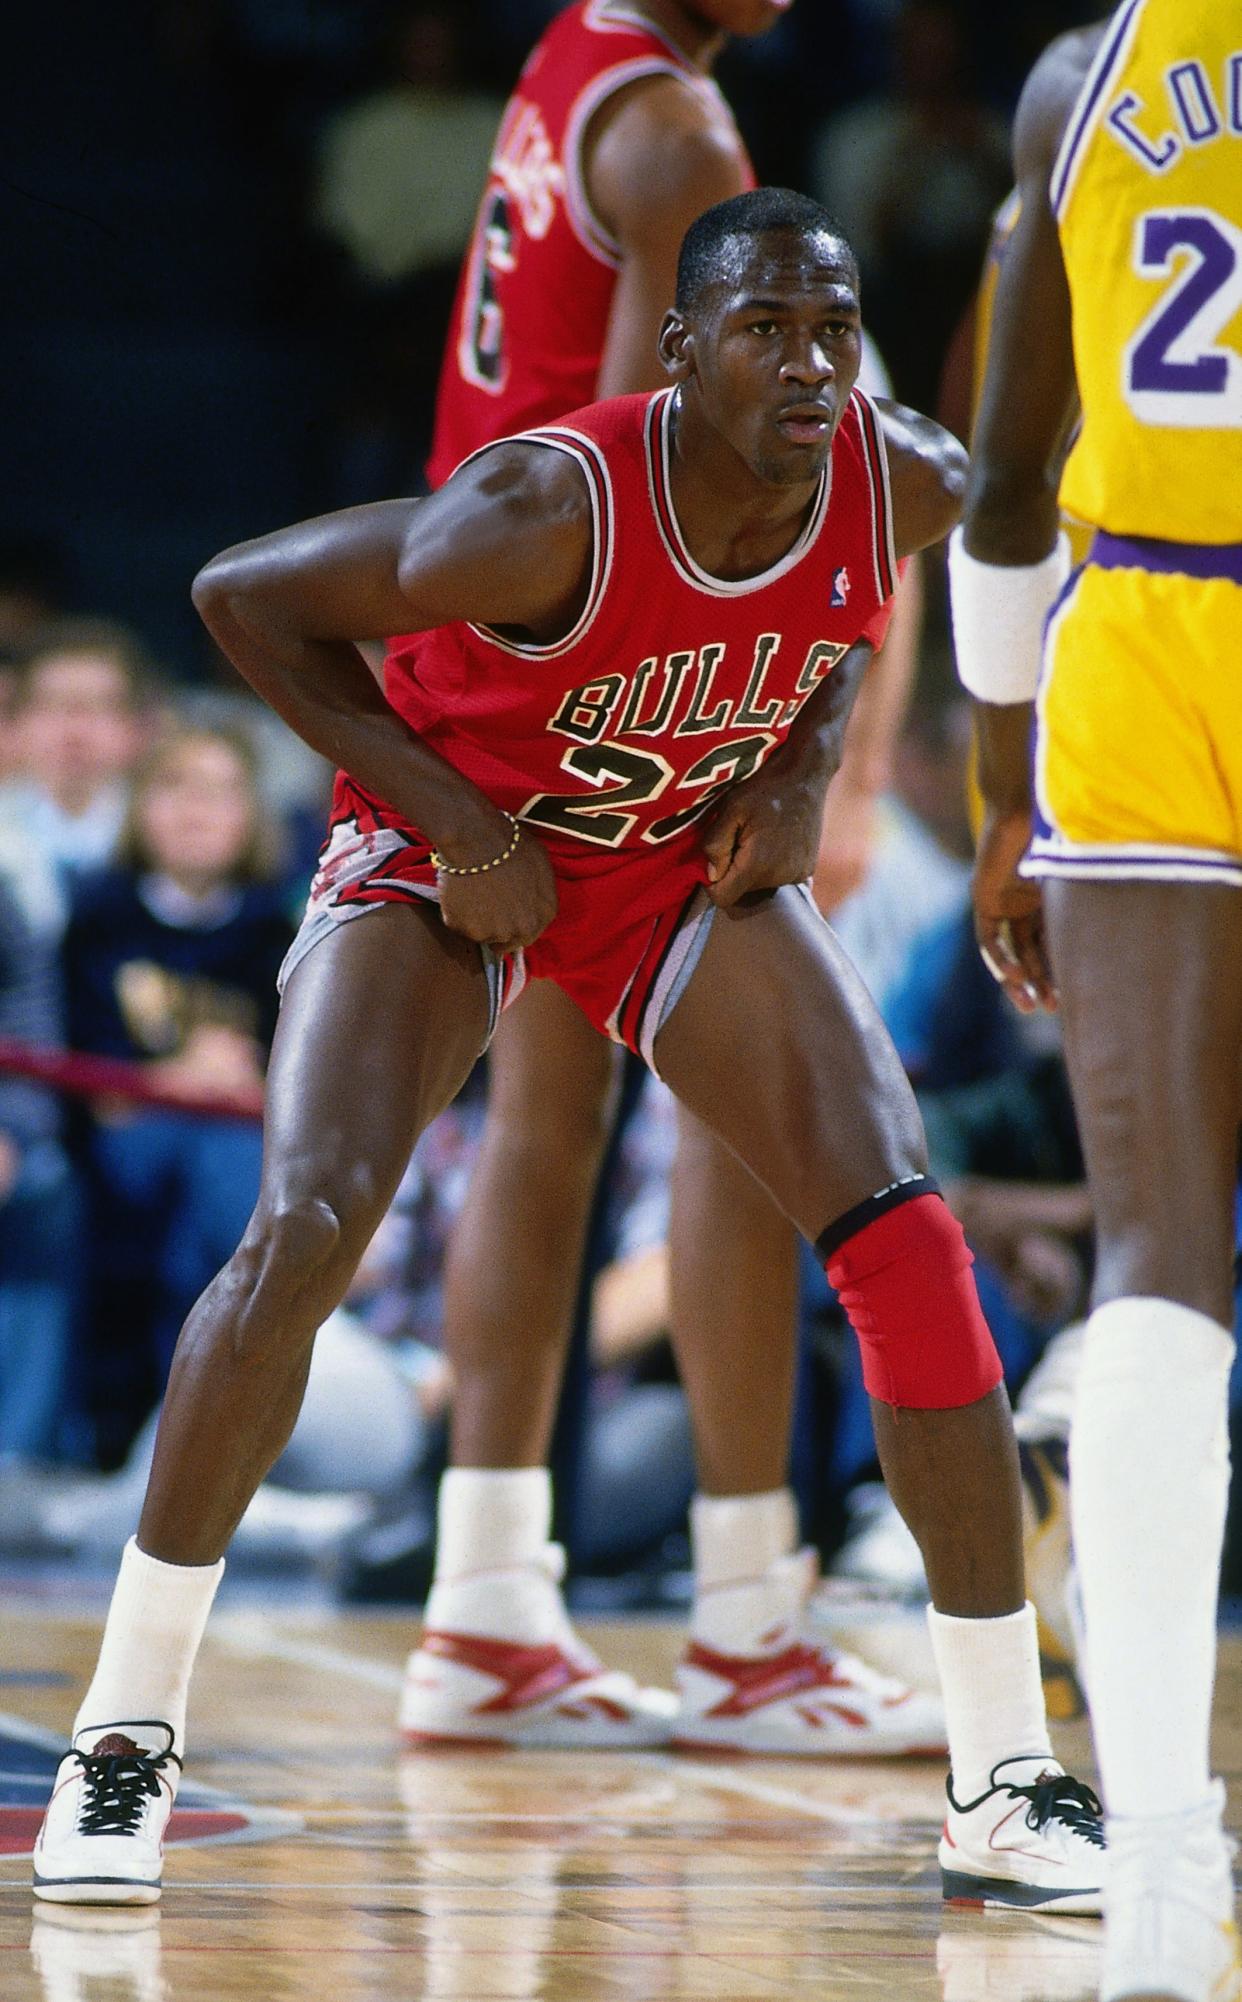 Michael Jordan defends against Michael Cooper in 1987 at the Great Western Forum in Inglewood, California. (Photo by Andrew D. Bernstein/NBAE via Getty Images)